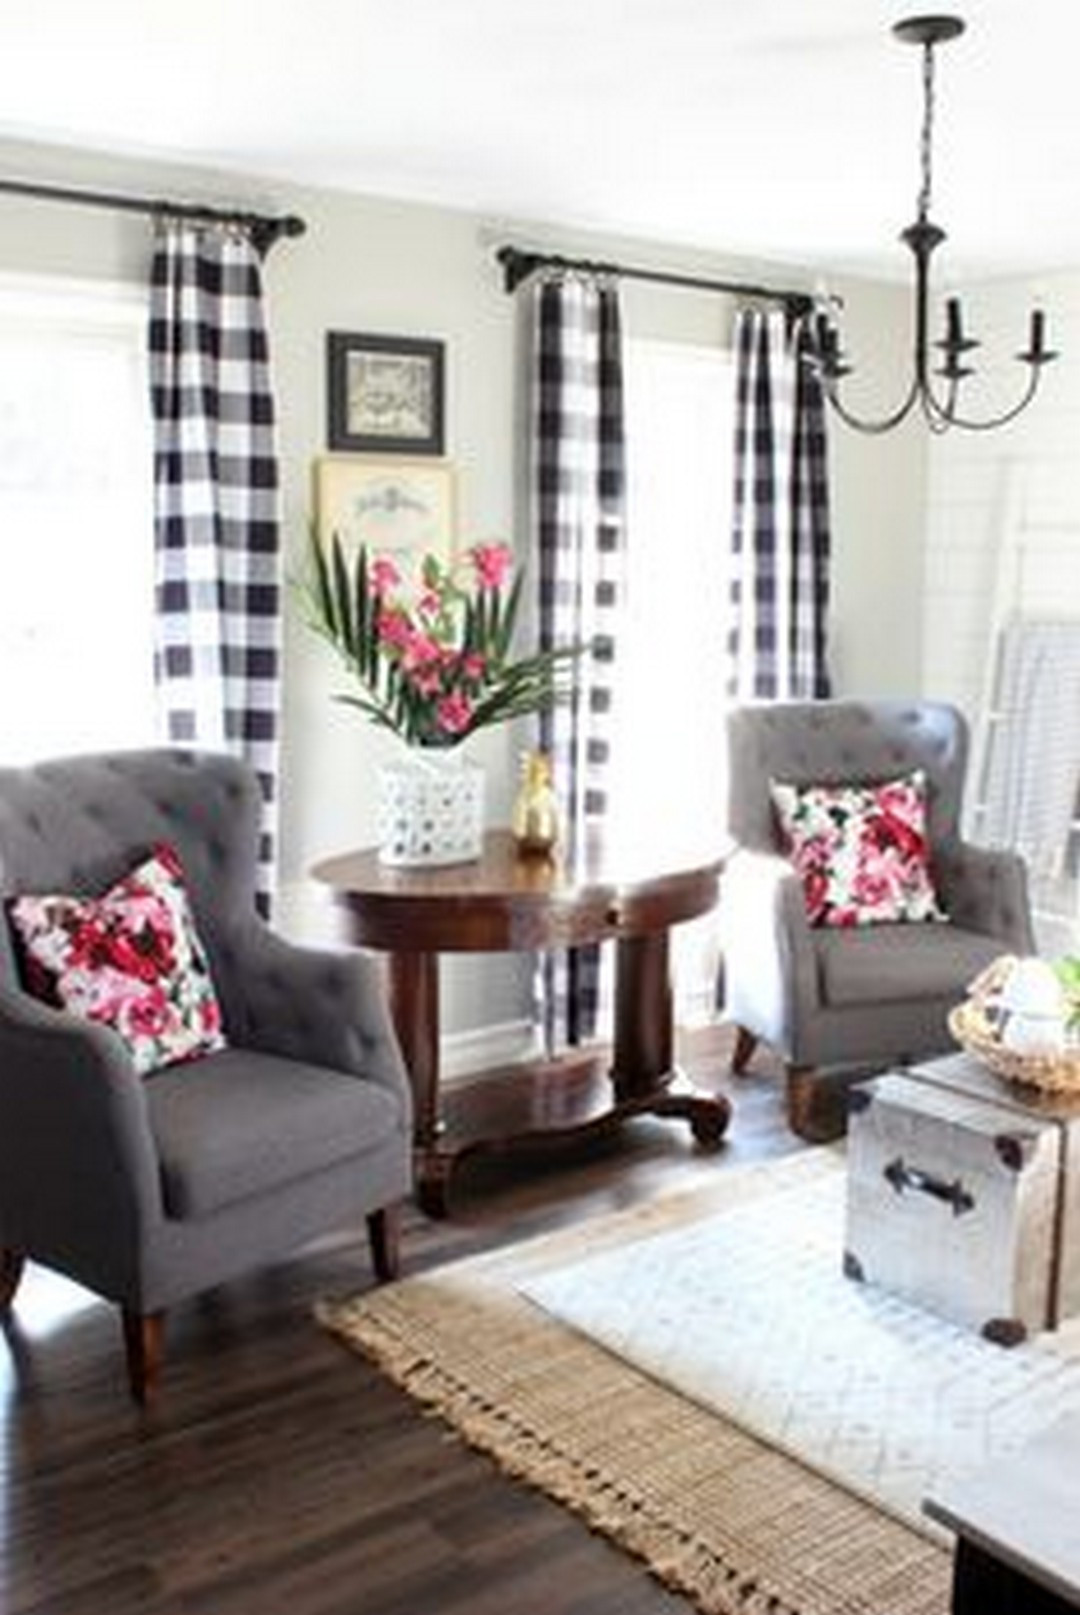 Farmhouse Curtains For Living Room
 Inspiring Farmhouse Living Room Decorations to Beautify